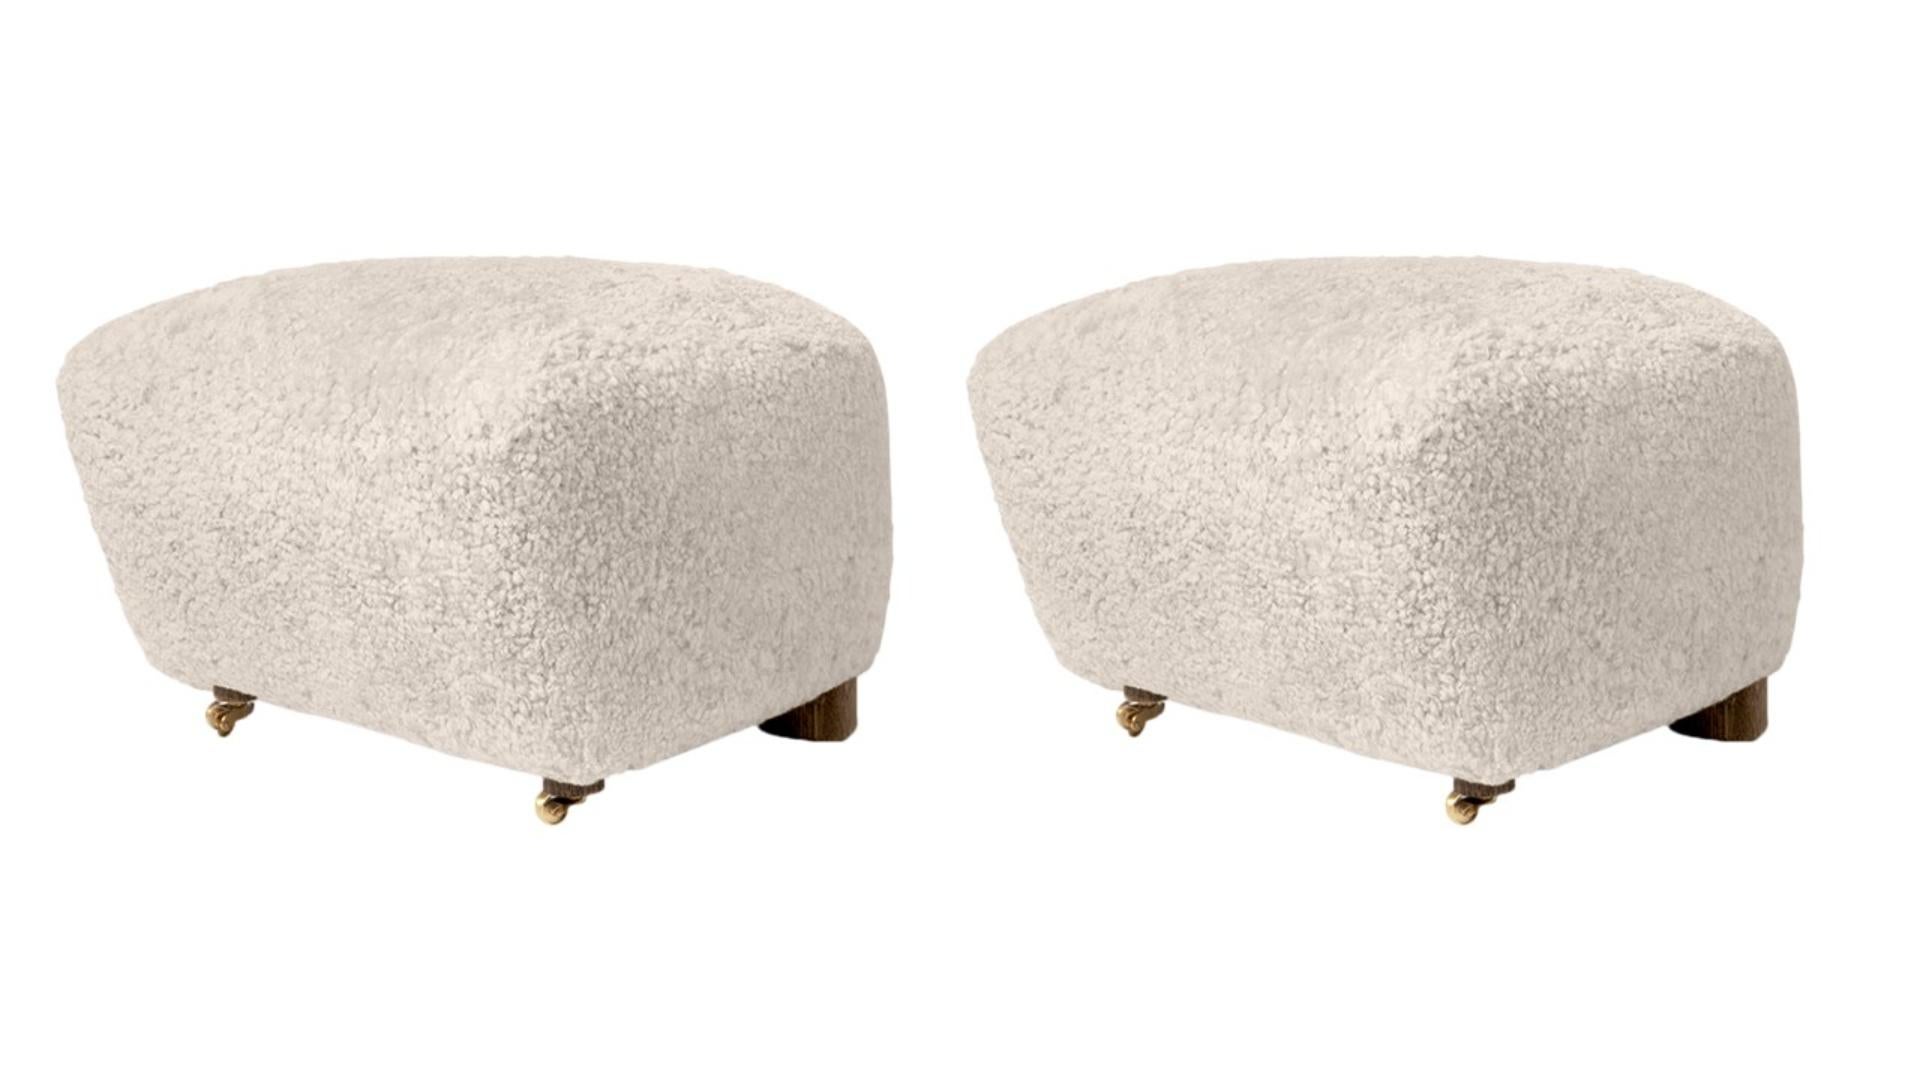 Set of 2 moonlight smoked oak sheepskin the tired man footstools by Lassen
Dimensions: W 55 x D 53 x H 36 cm 
Materials: Sheepskin

Flemming Lassen designed the overstuffed easy chair, The Tired Man, for The Copenhagen Cabinetmakers’ Guild